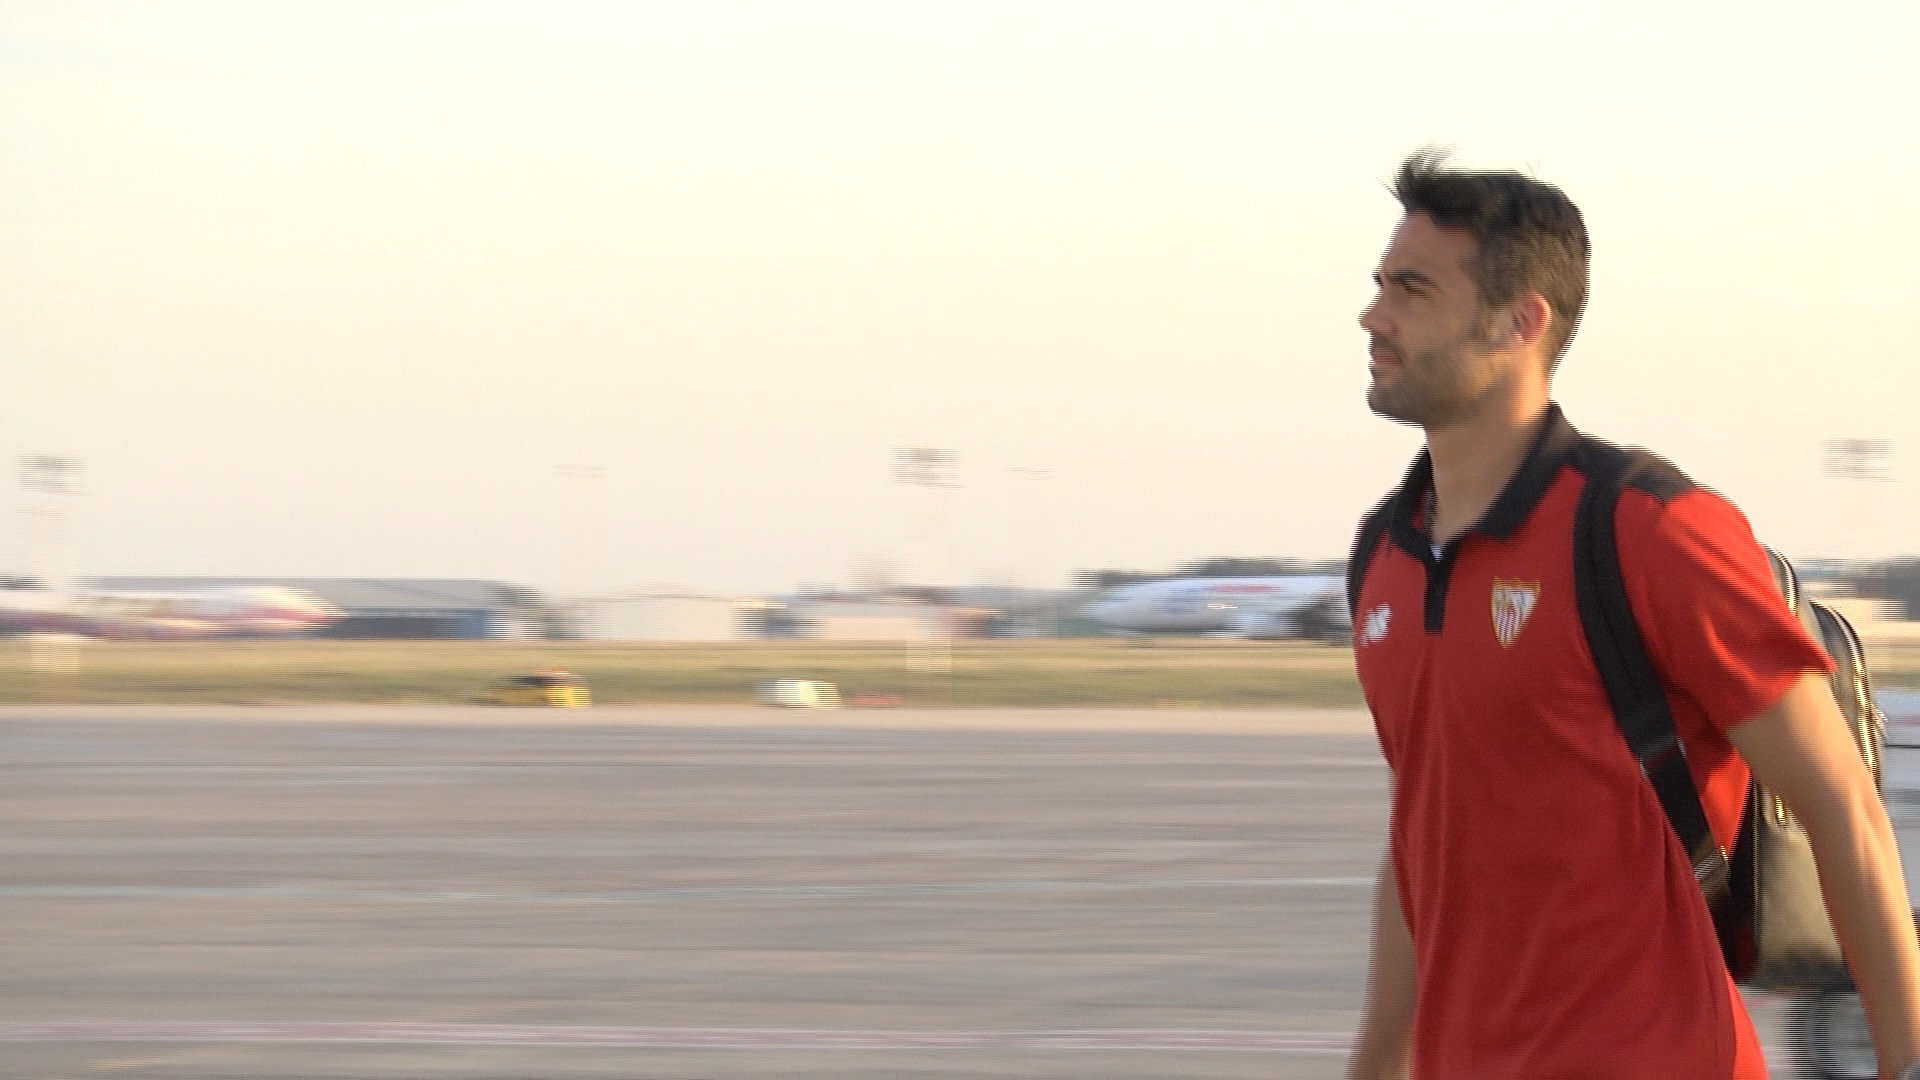 Vicente Iborra at the airport